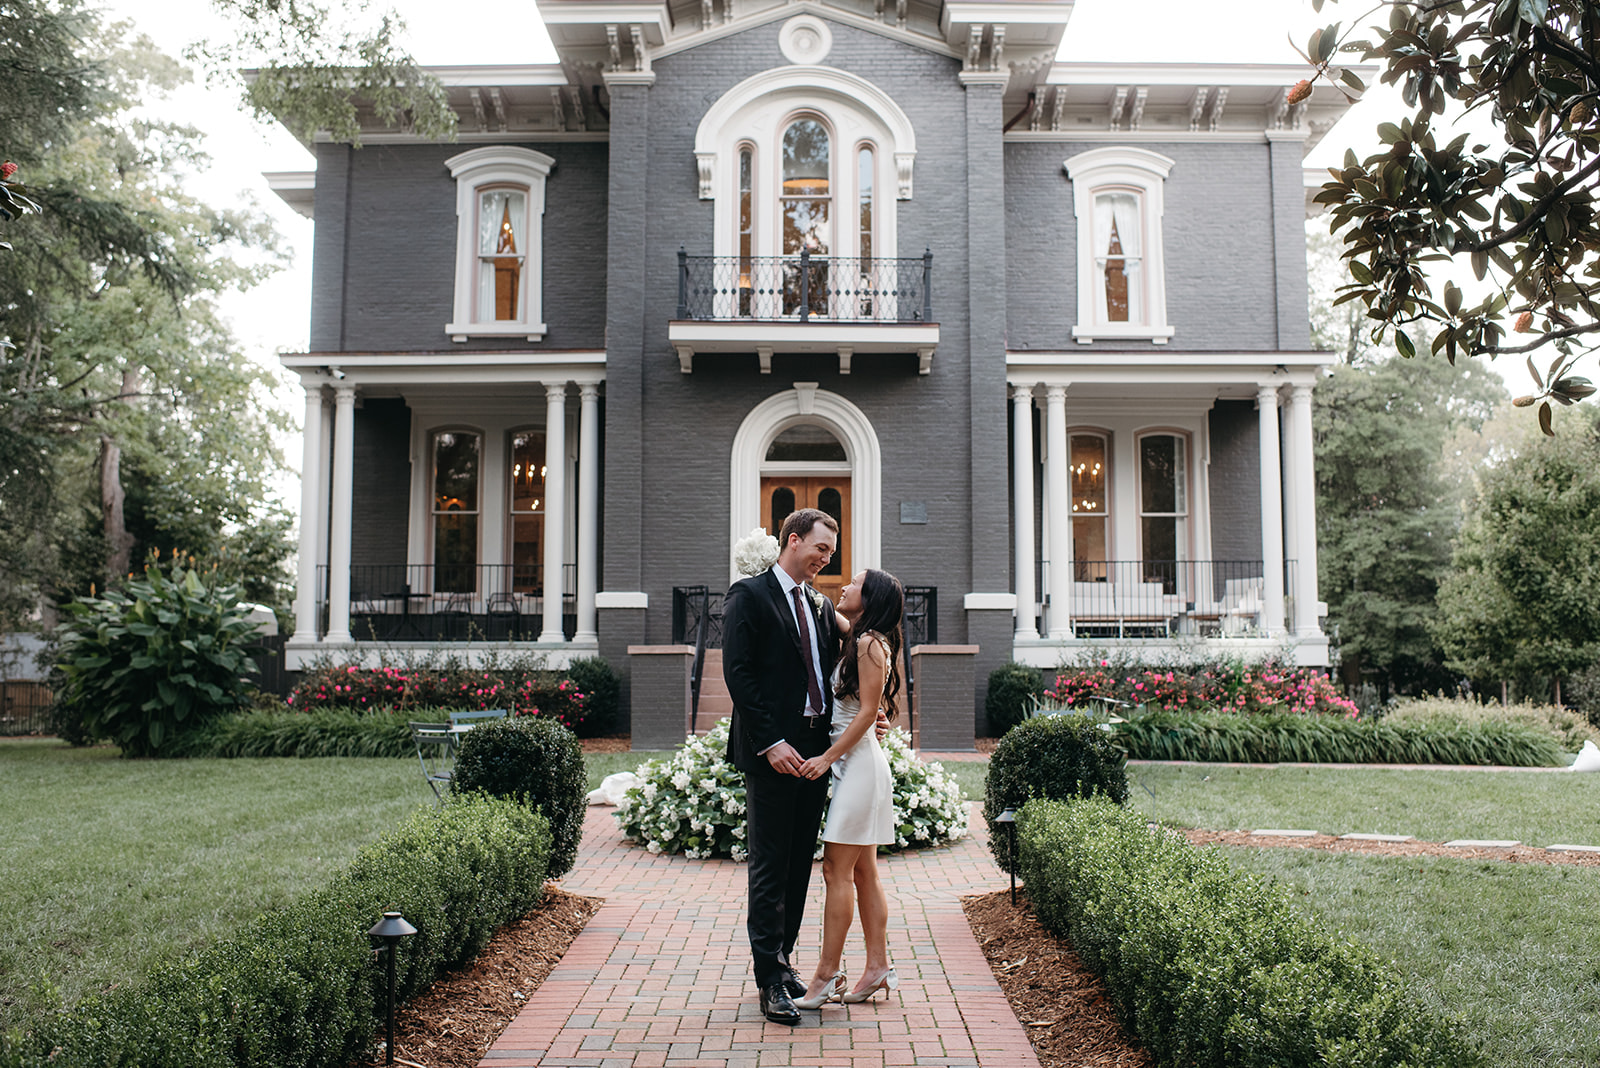 Small, Heights House wedding in downtown Raleigh. 